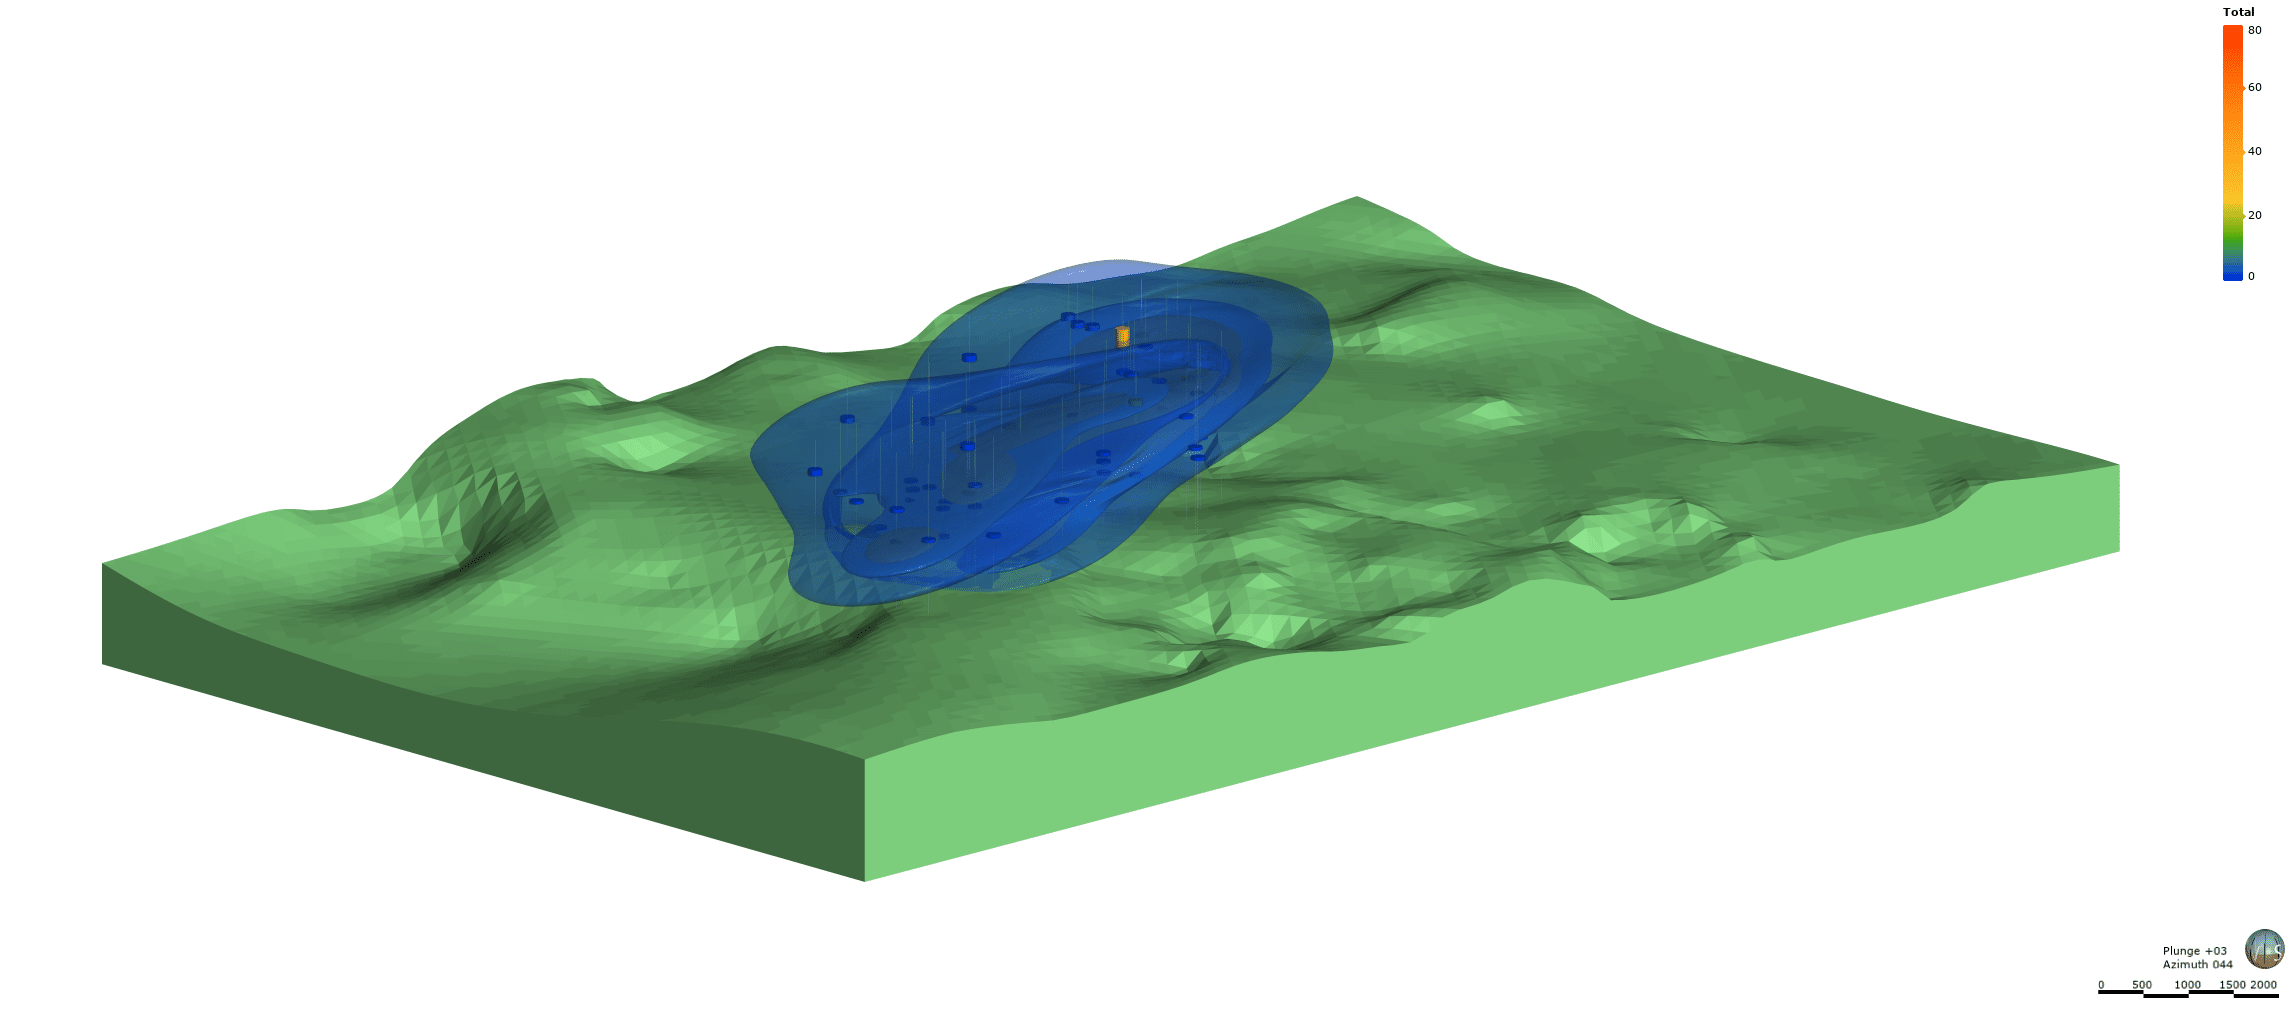 Comparing Leapfrog Radial Basis Function and Kriging